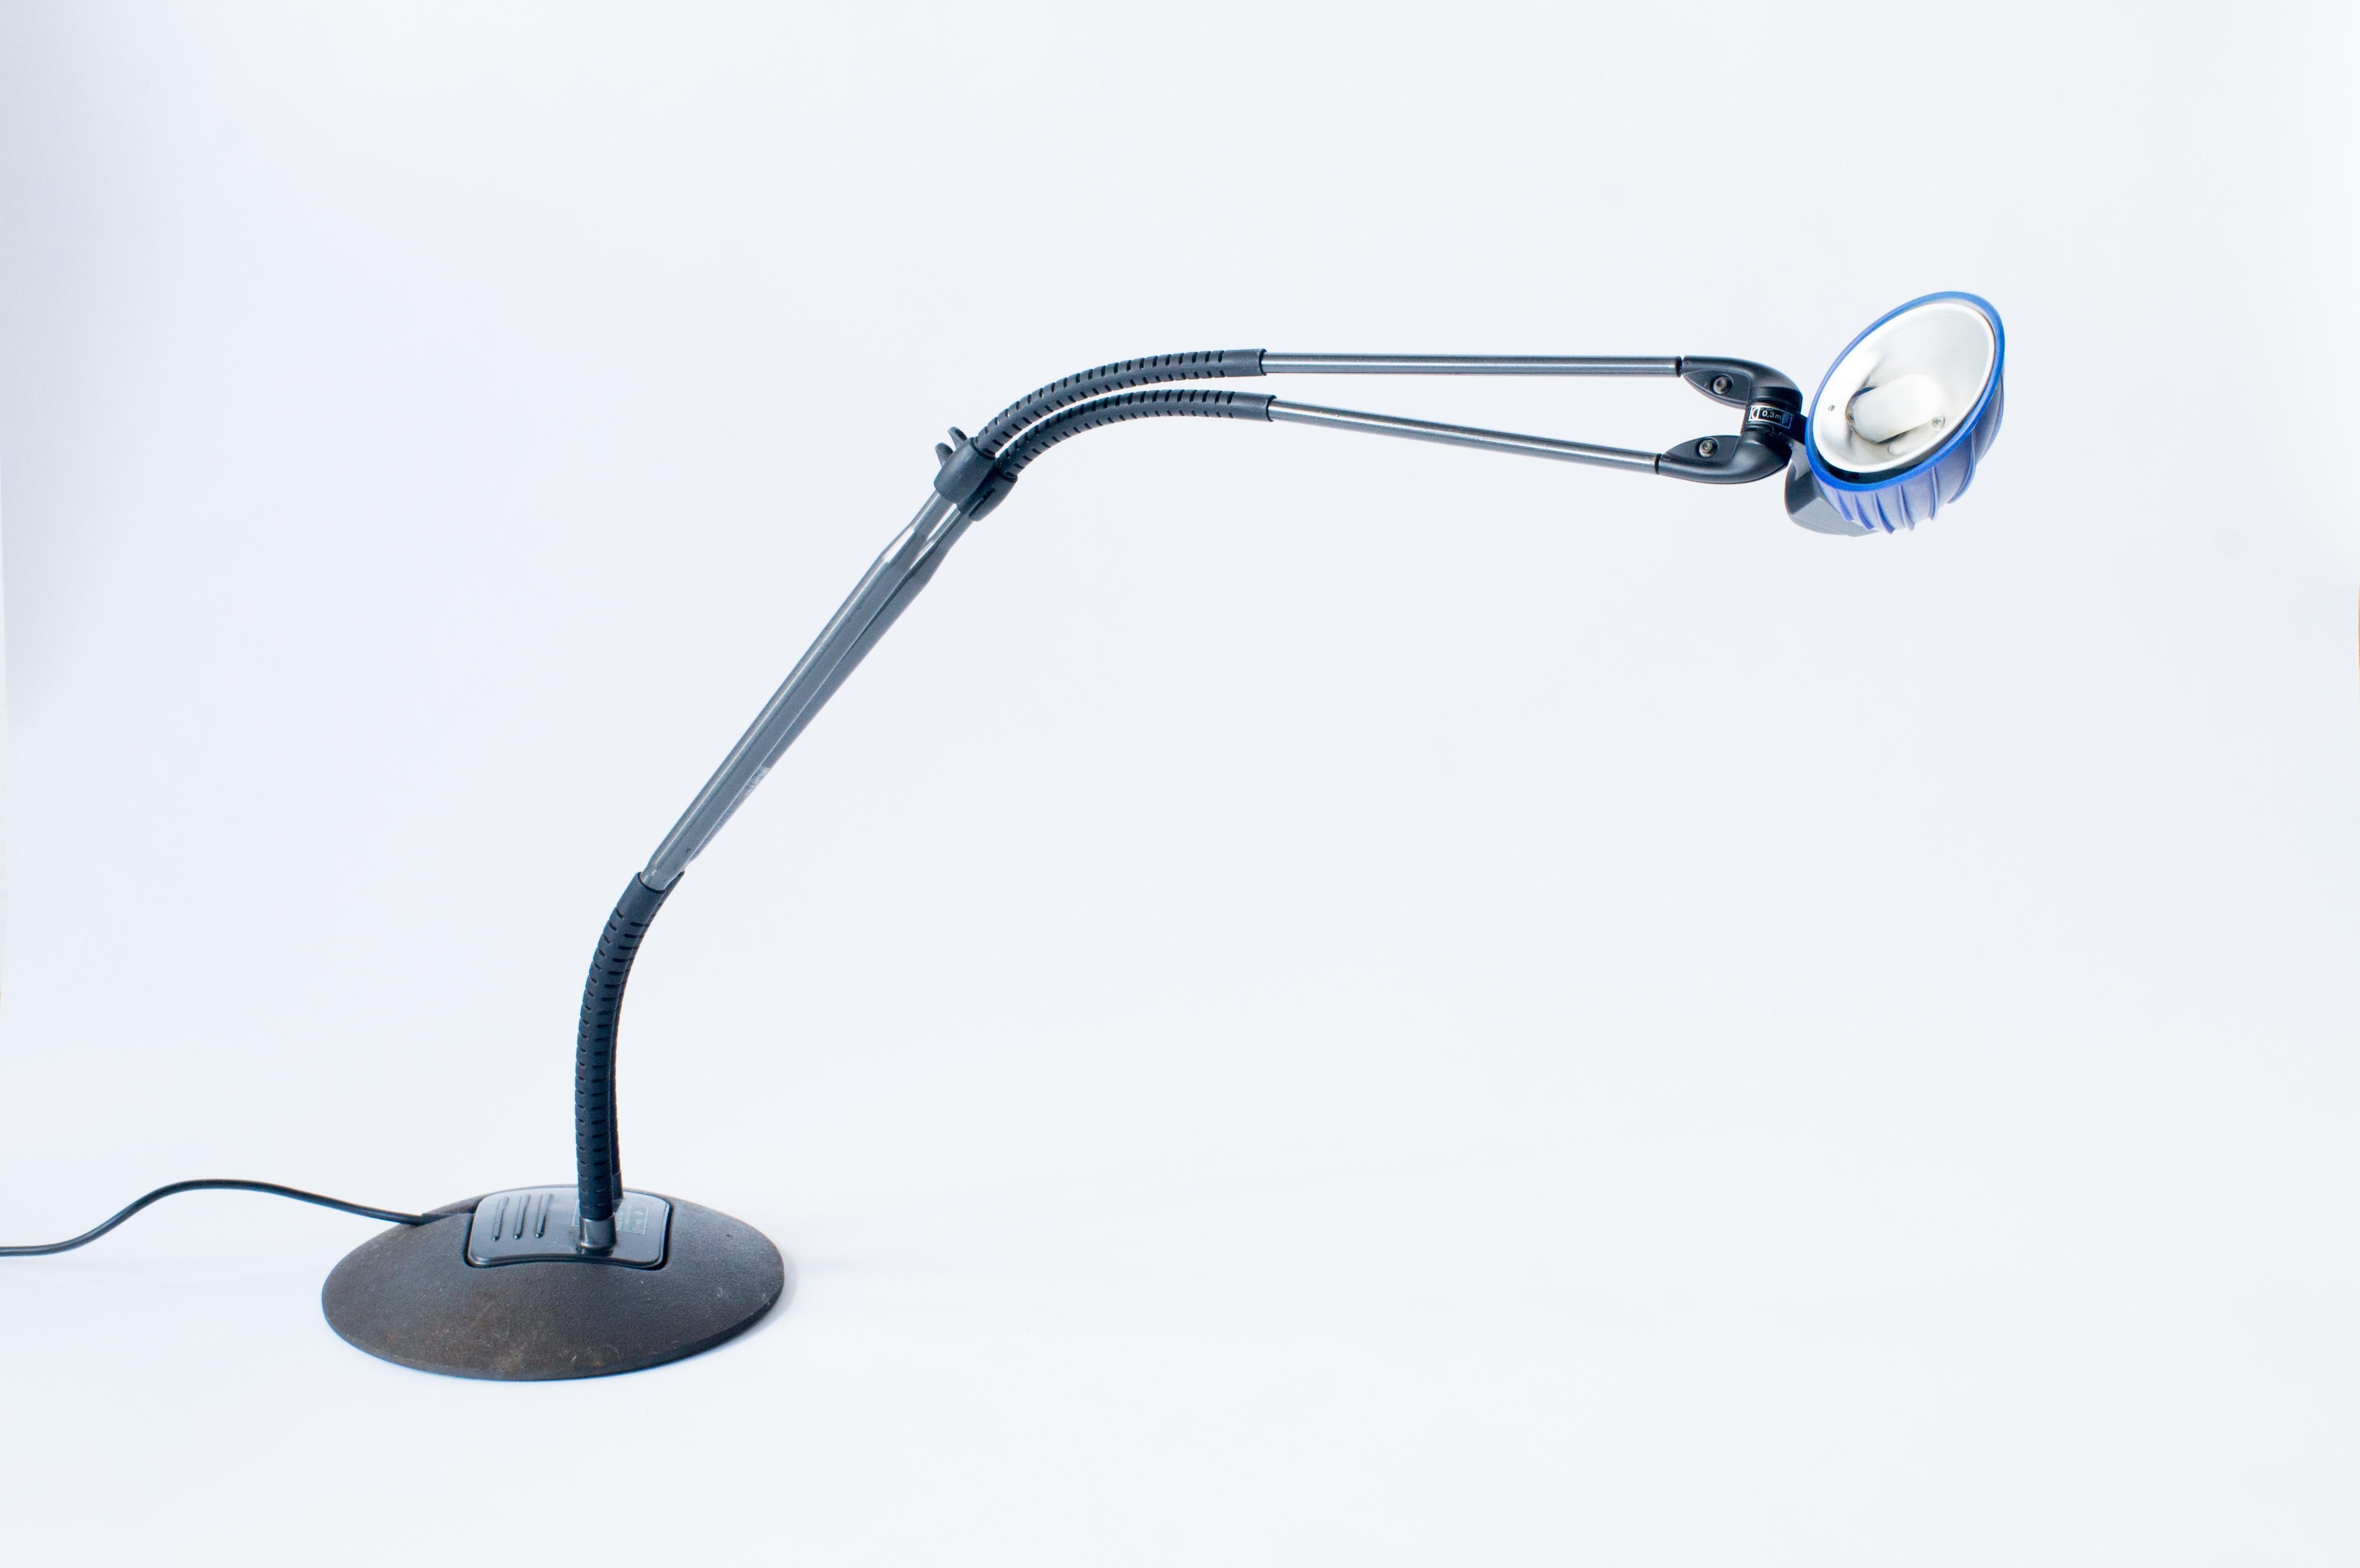 Tango desk lamp designed by Stephan Copeland for Arteluce in 1989
Made of steel. Black and purple color combination. 
Twin arms with spring makes freely direction and position of the lamp.
Maximum height is 110 cm, Maximum width is 110cm, base